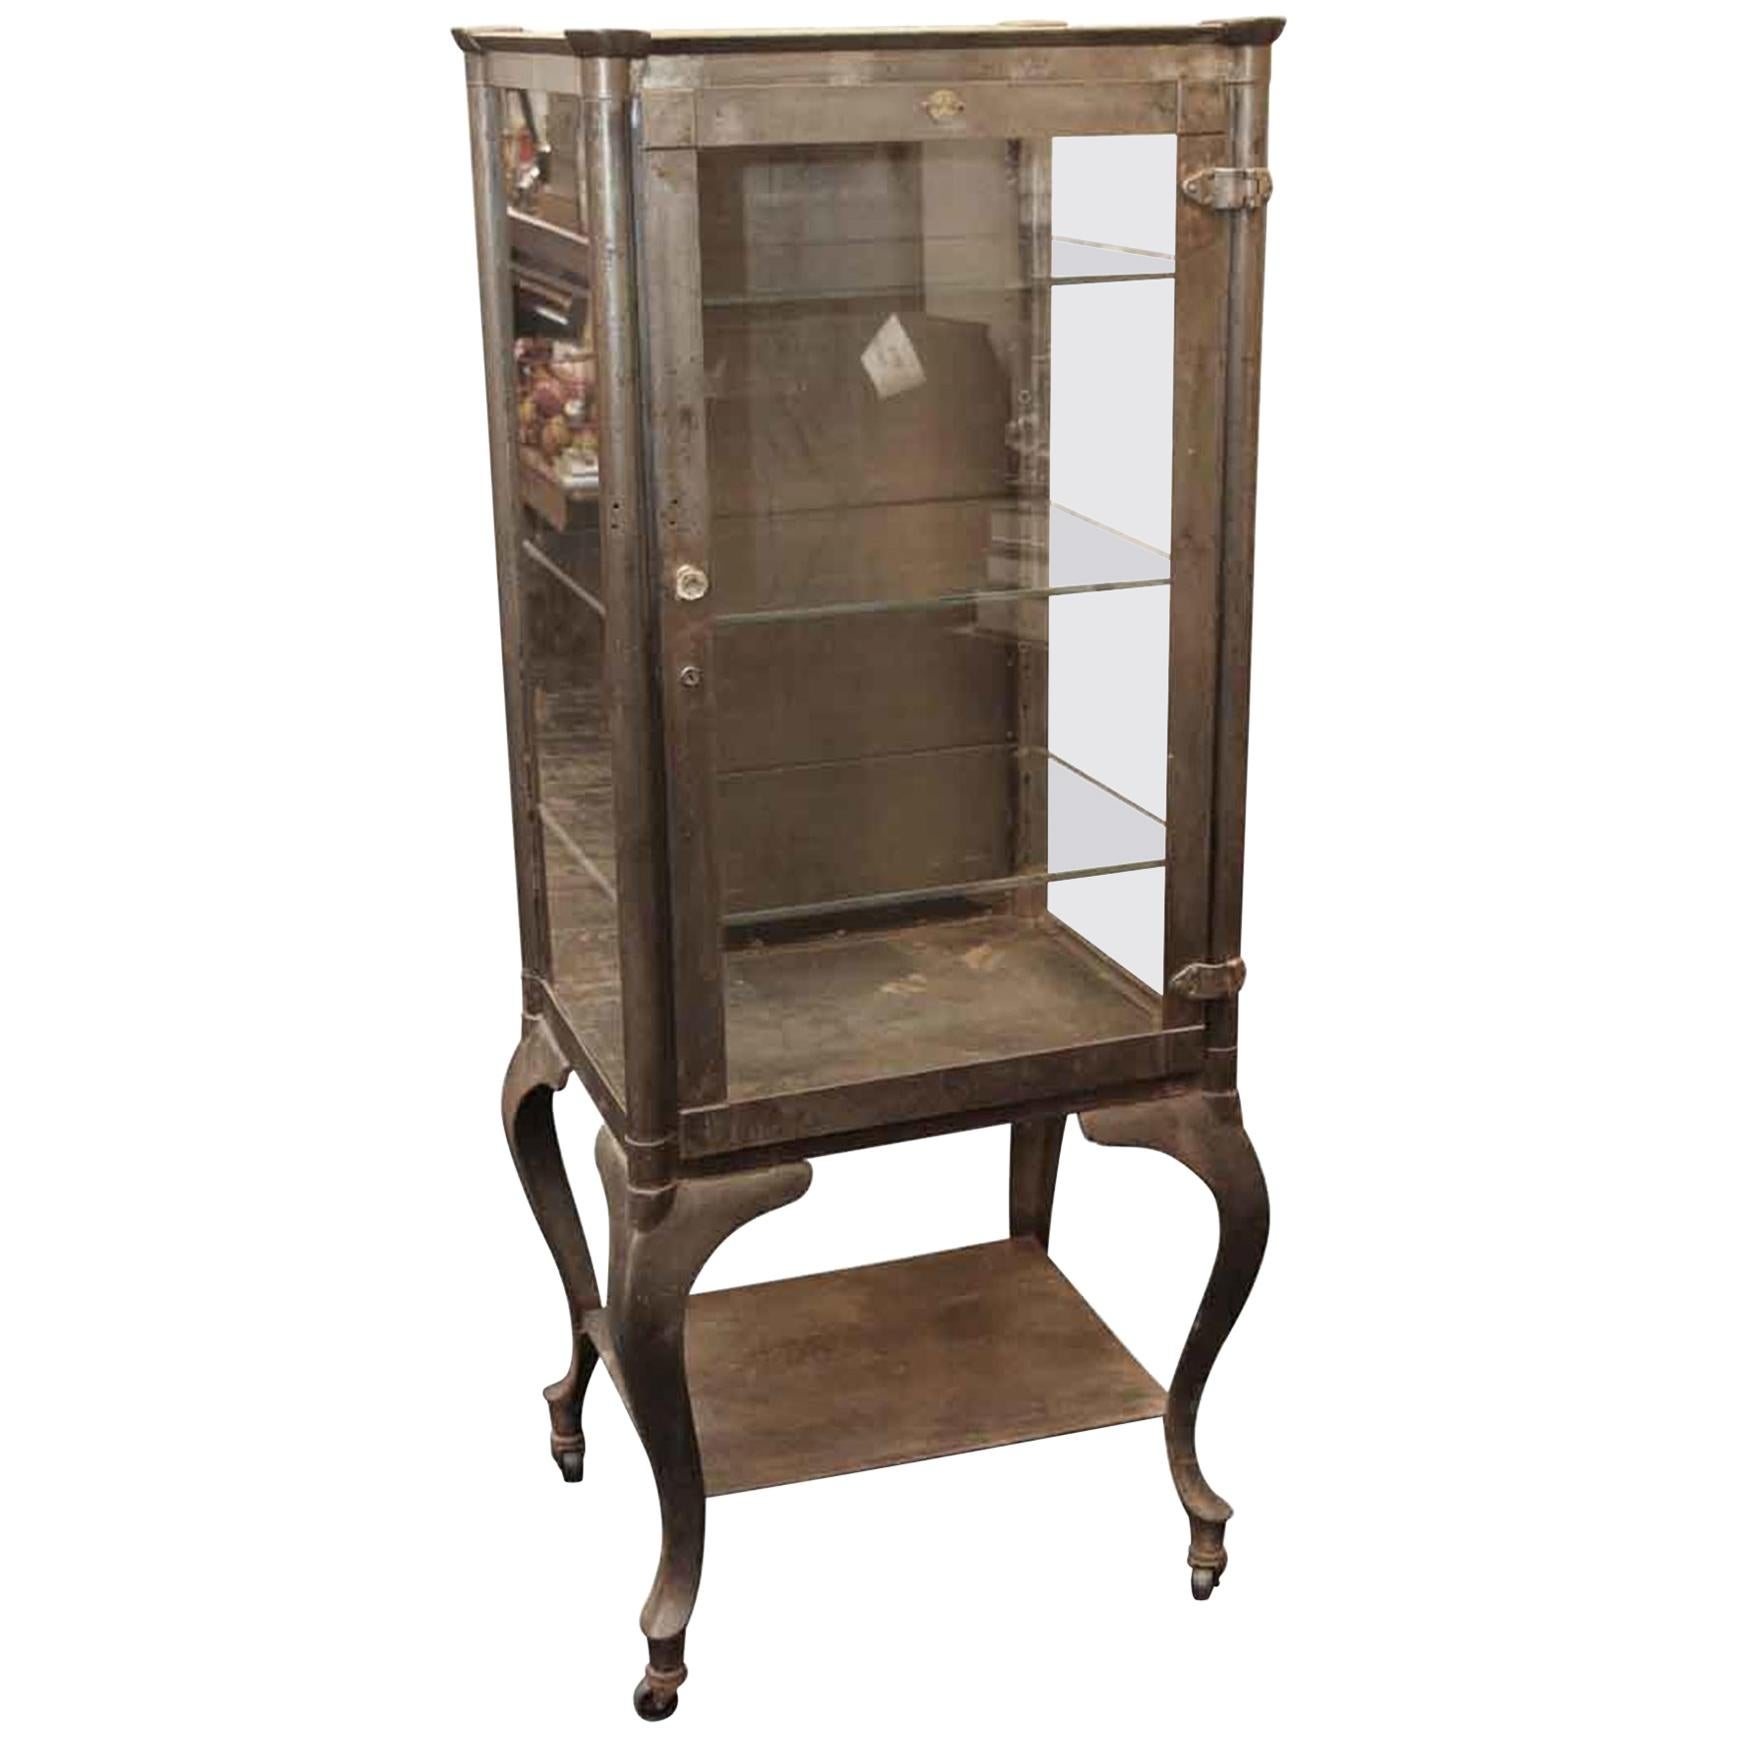 1910 Stripped and Lacquered Medical Cabinet with Cabriole Legs